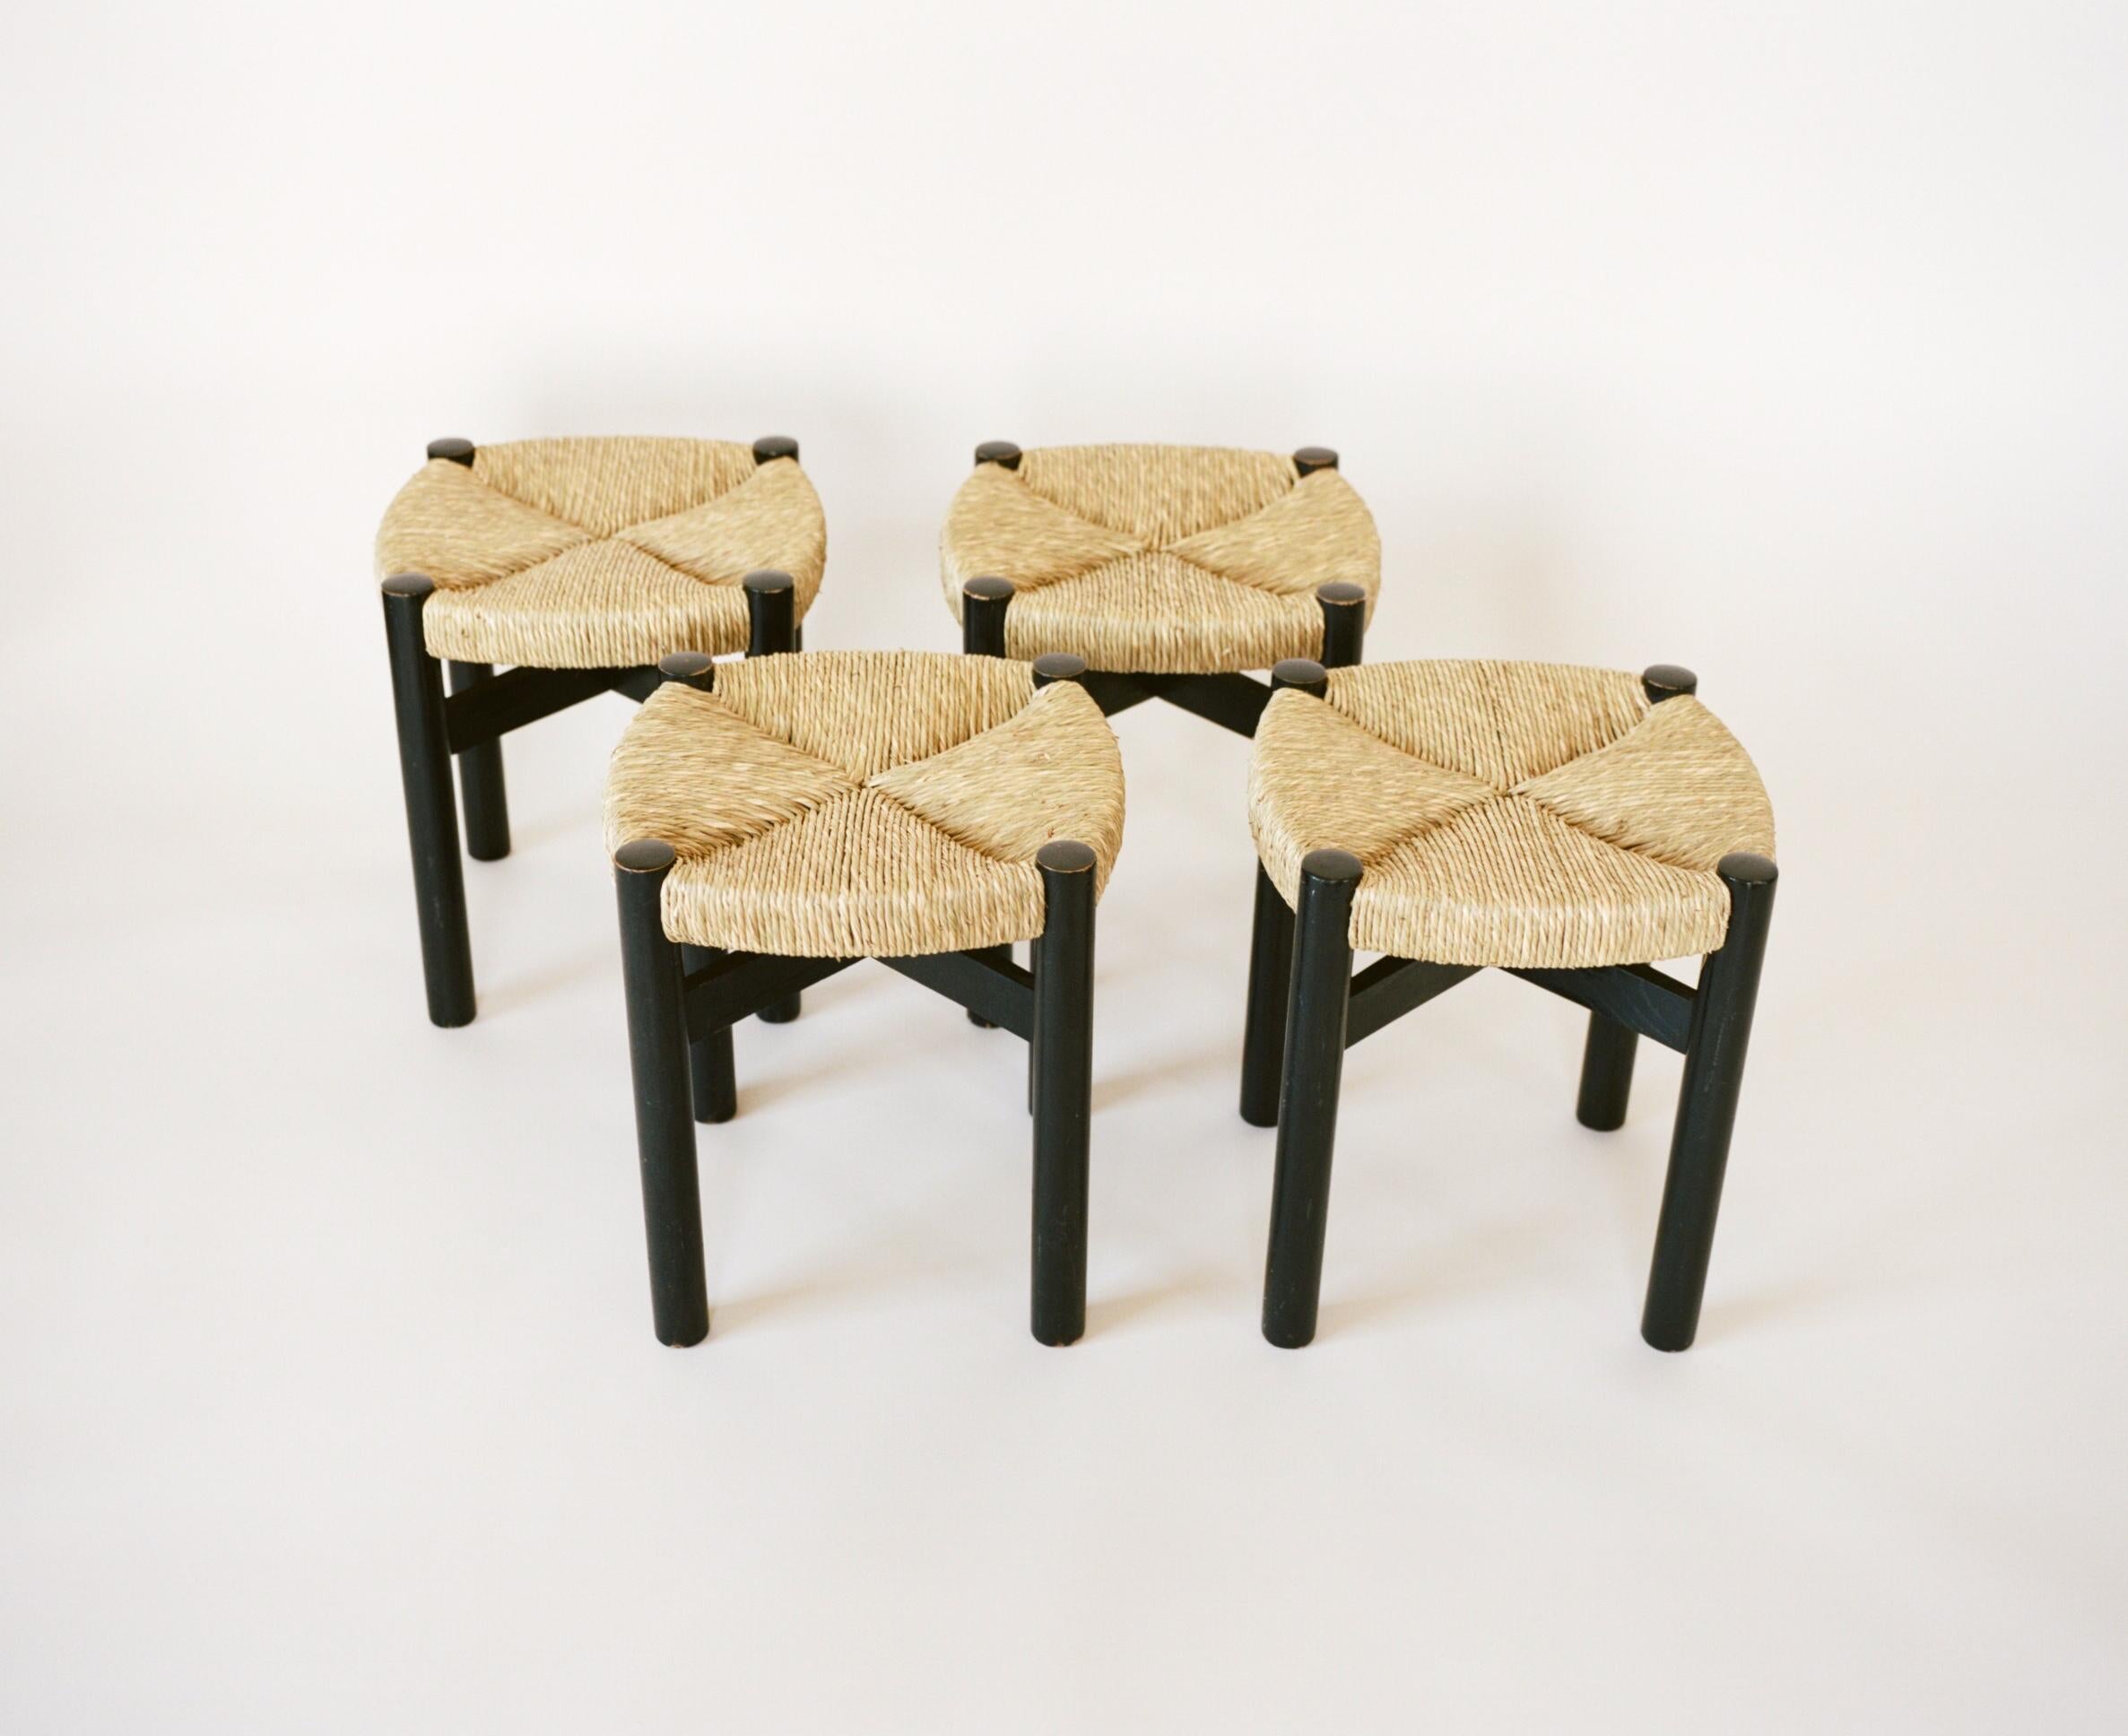 A set of four black oakwood stools with woven rush seats by Charlotte Perriand, circa 1950. Perriand produced these stools after her 6 year stay in Japan. Returning to Paris, Perriand was commissioned to design the interiors of Hôtel le Doron in